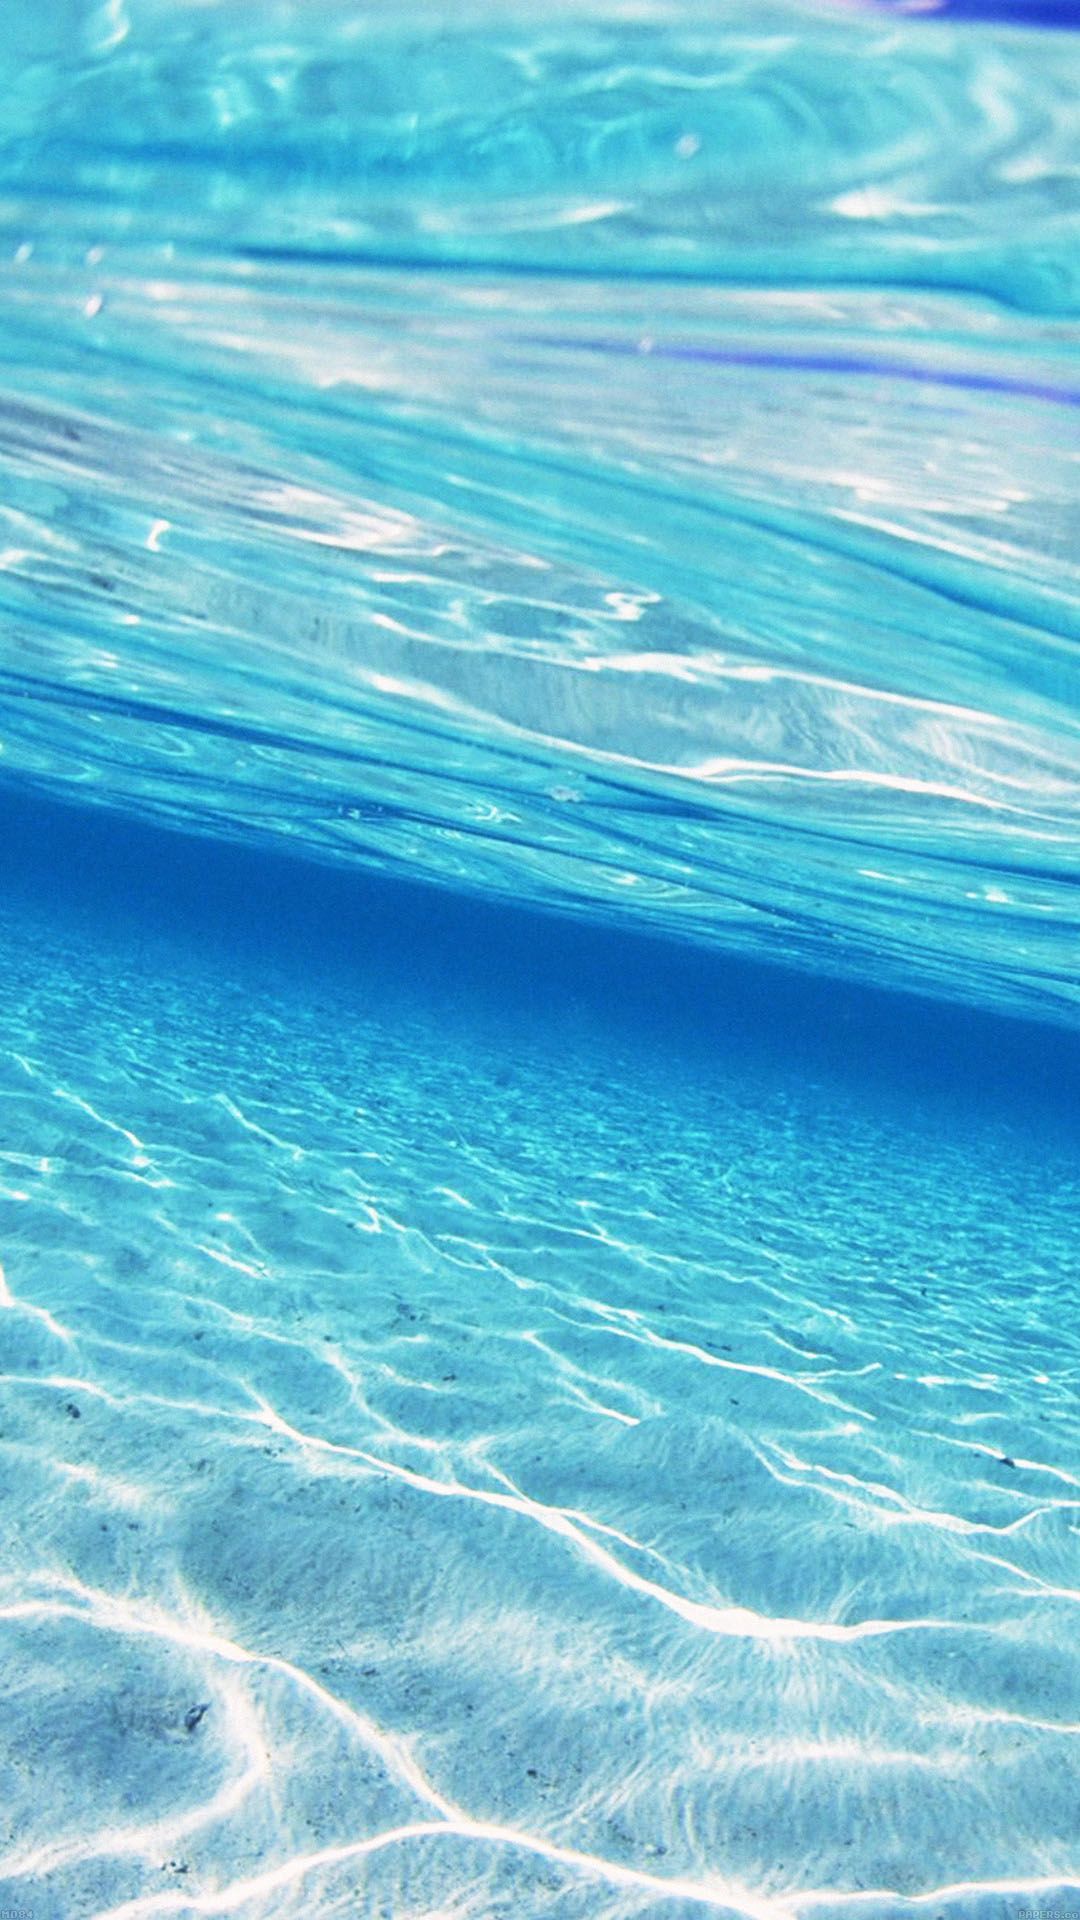 IPhone wallpaper of the day: The blue of the ocean - Underwater